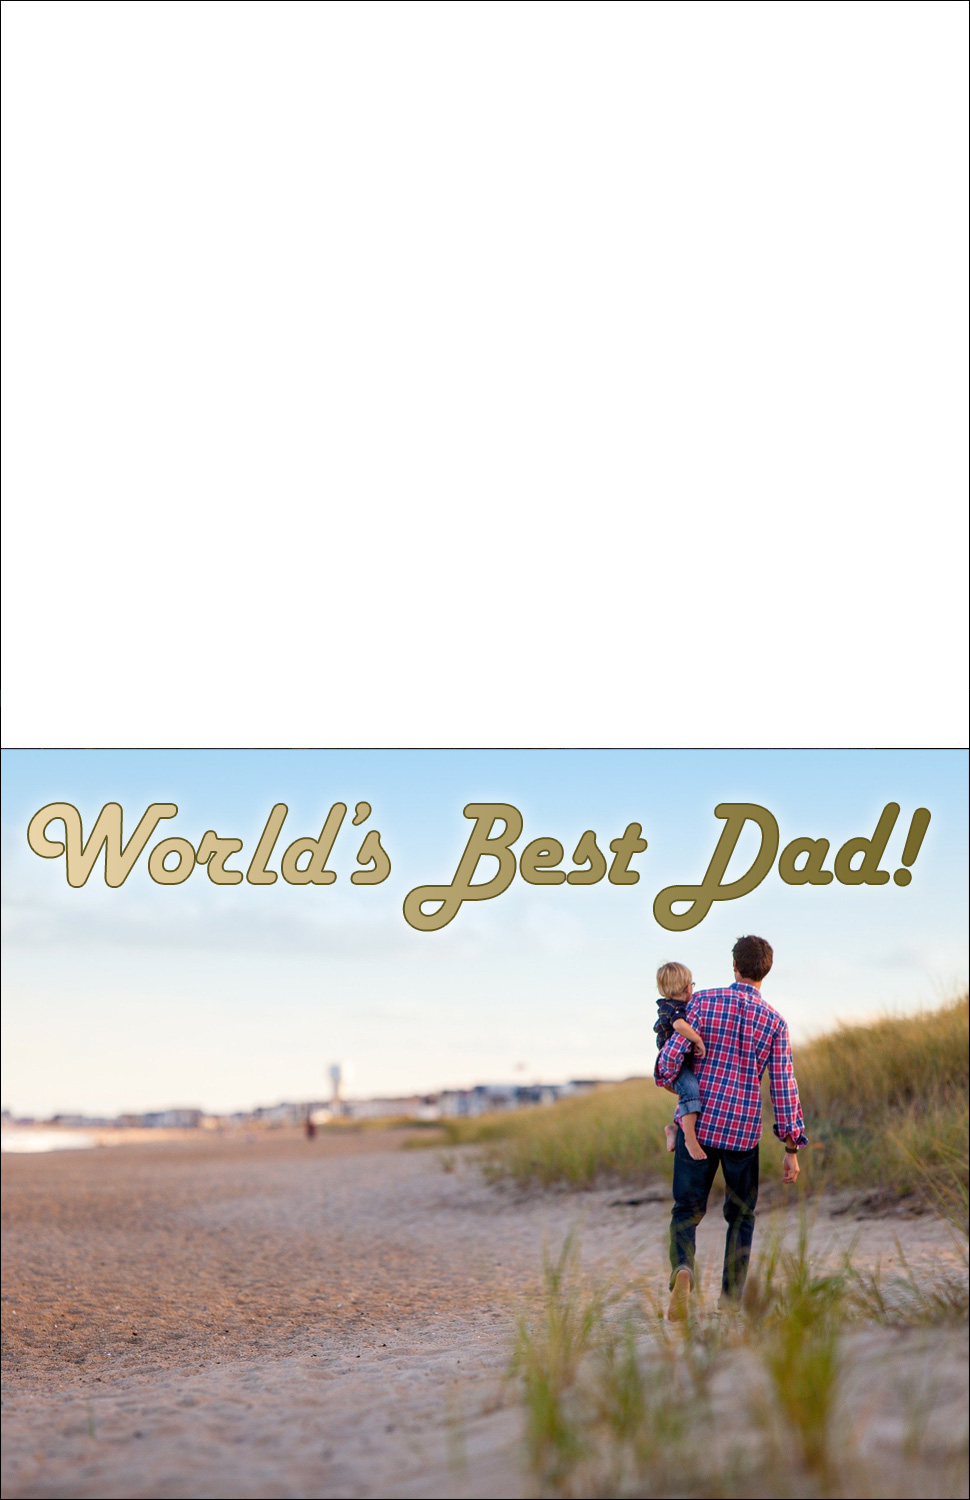 A printable card reading World's Best Dad, and picturing a father walking along a beach carrying his child.